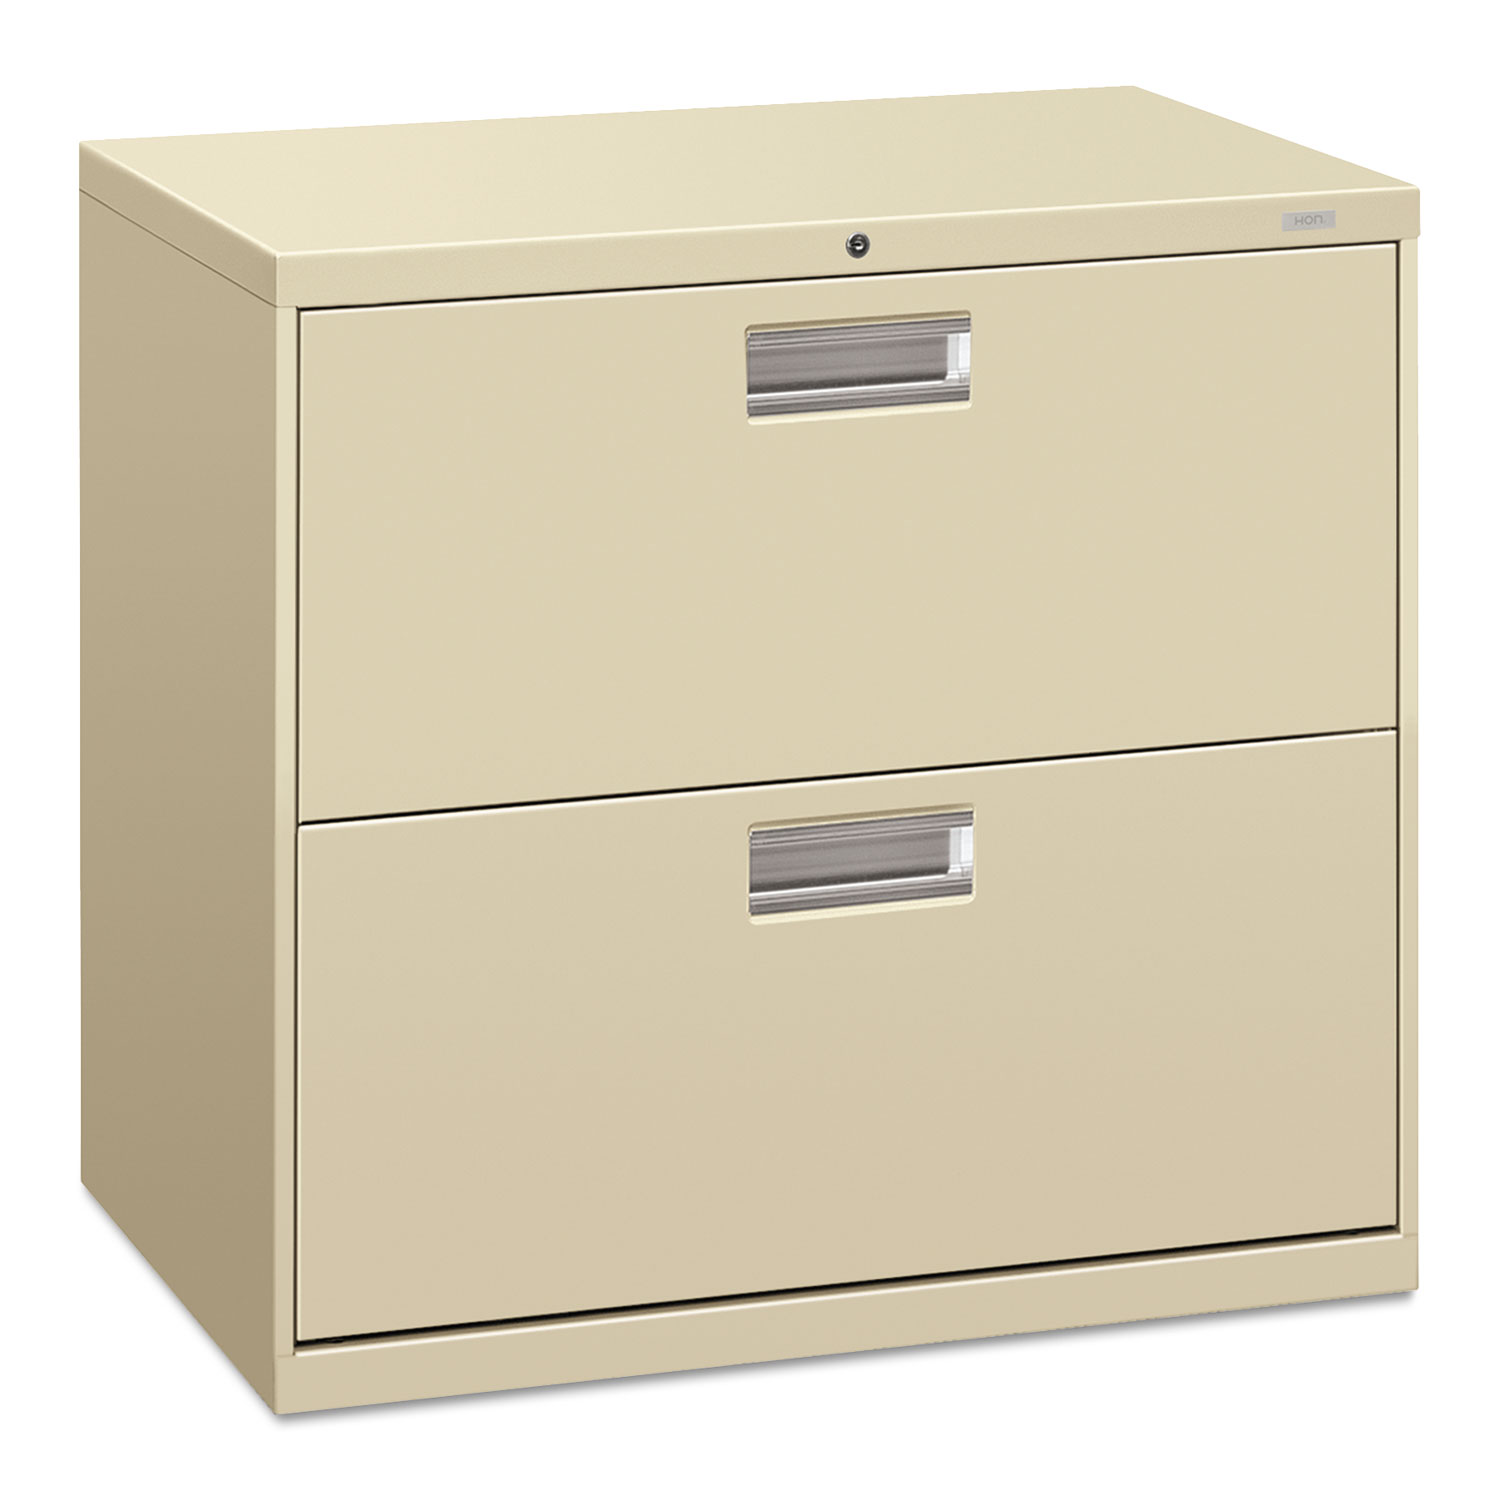 600 Series Two-Drawer Lateral File, 30w x 19-1/4d, Putty